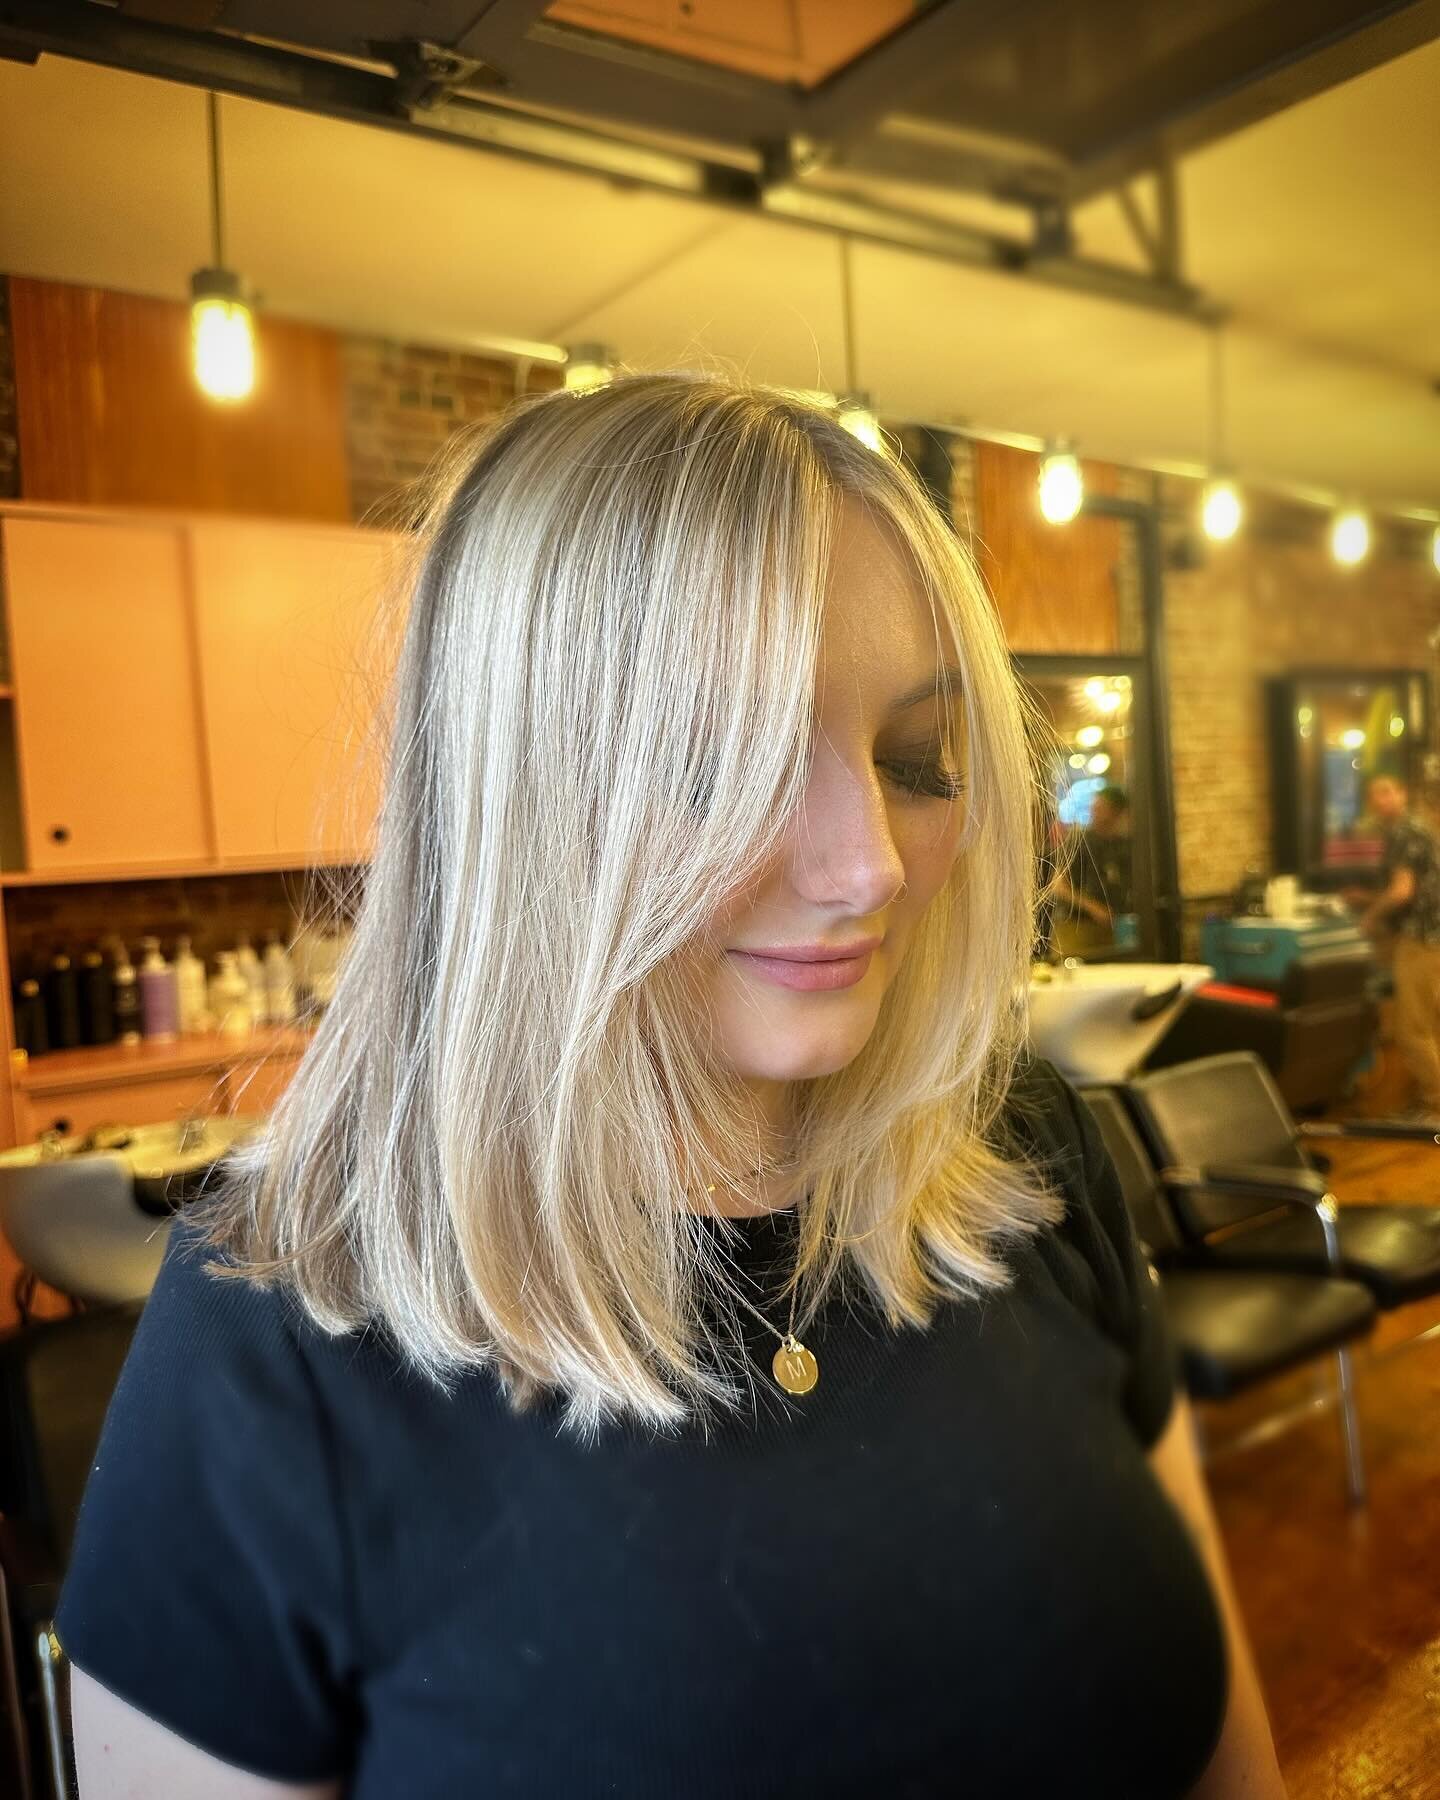 Soft blonde ✨

Babylights and a 9-inch chop on my girl @mariahgsims . Obsessed with this transformation. (Sorry I forgot the before).

#universityofkentucky #blonde #babylights #springblonde #blendedhair